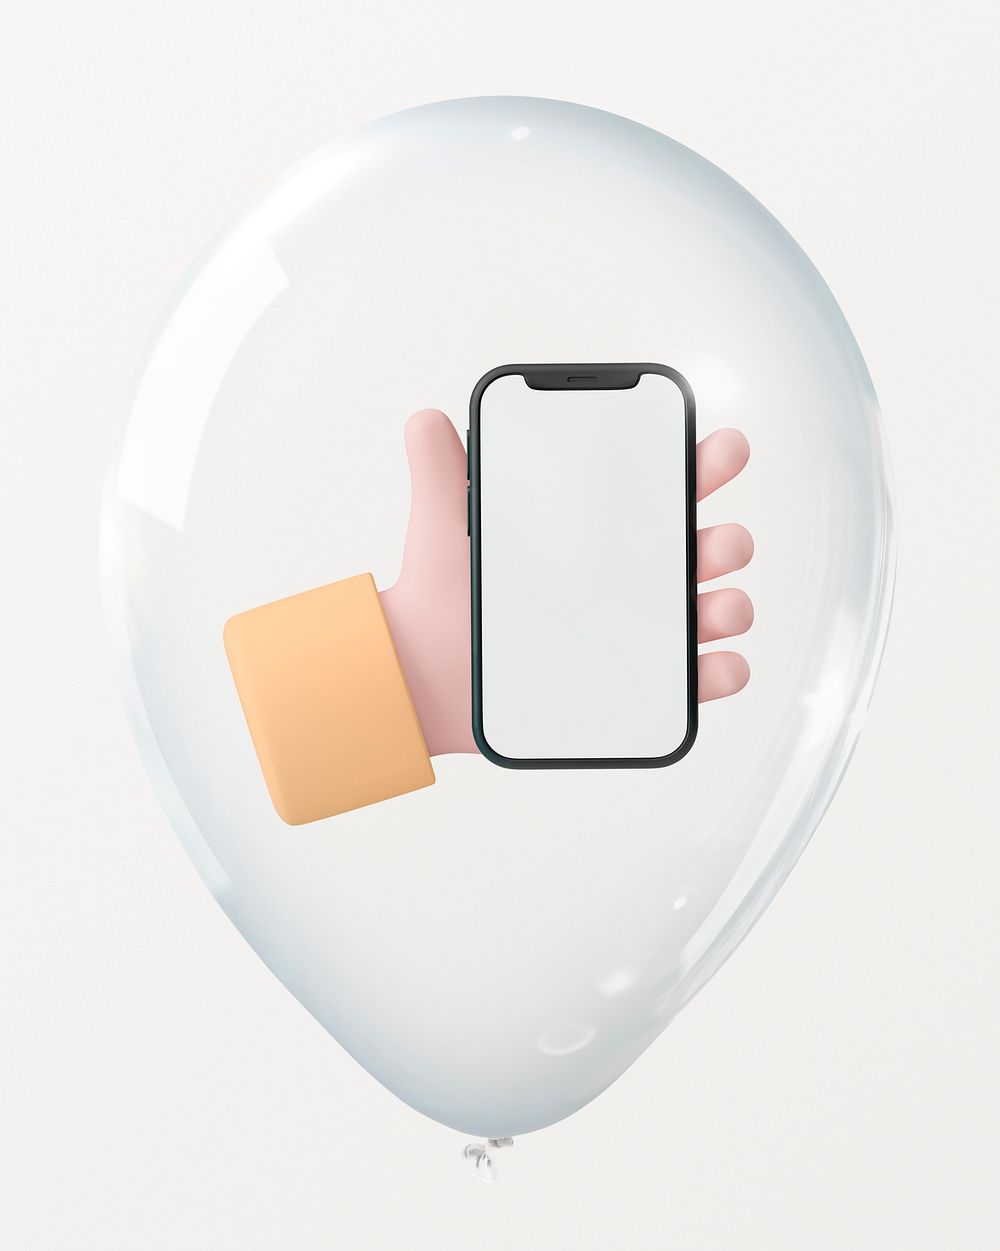 Hand holding phone in clear balloon